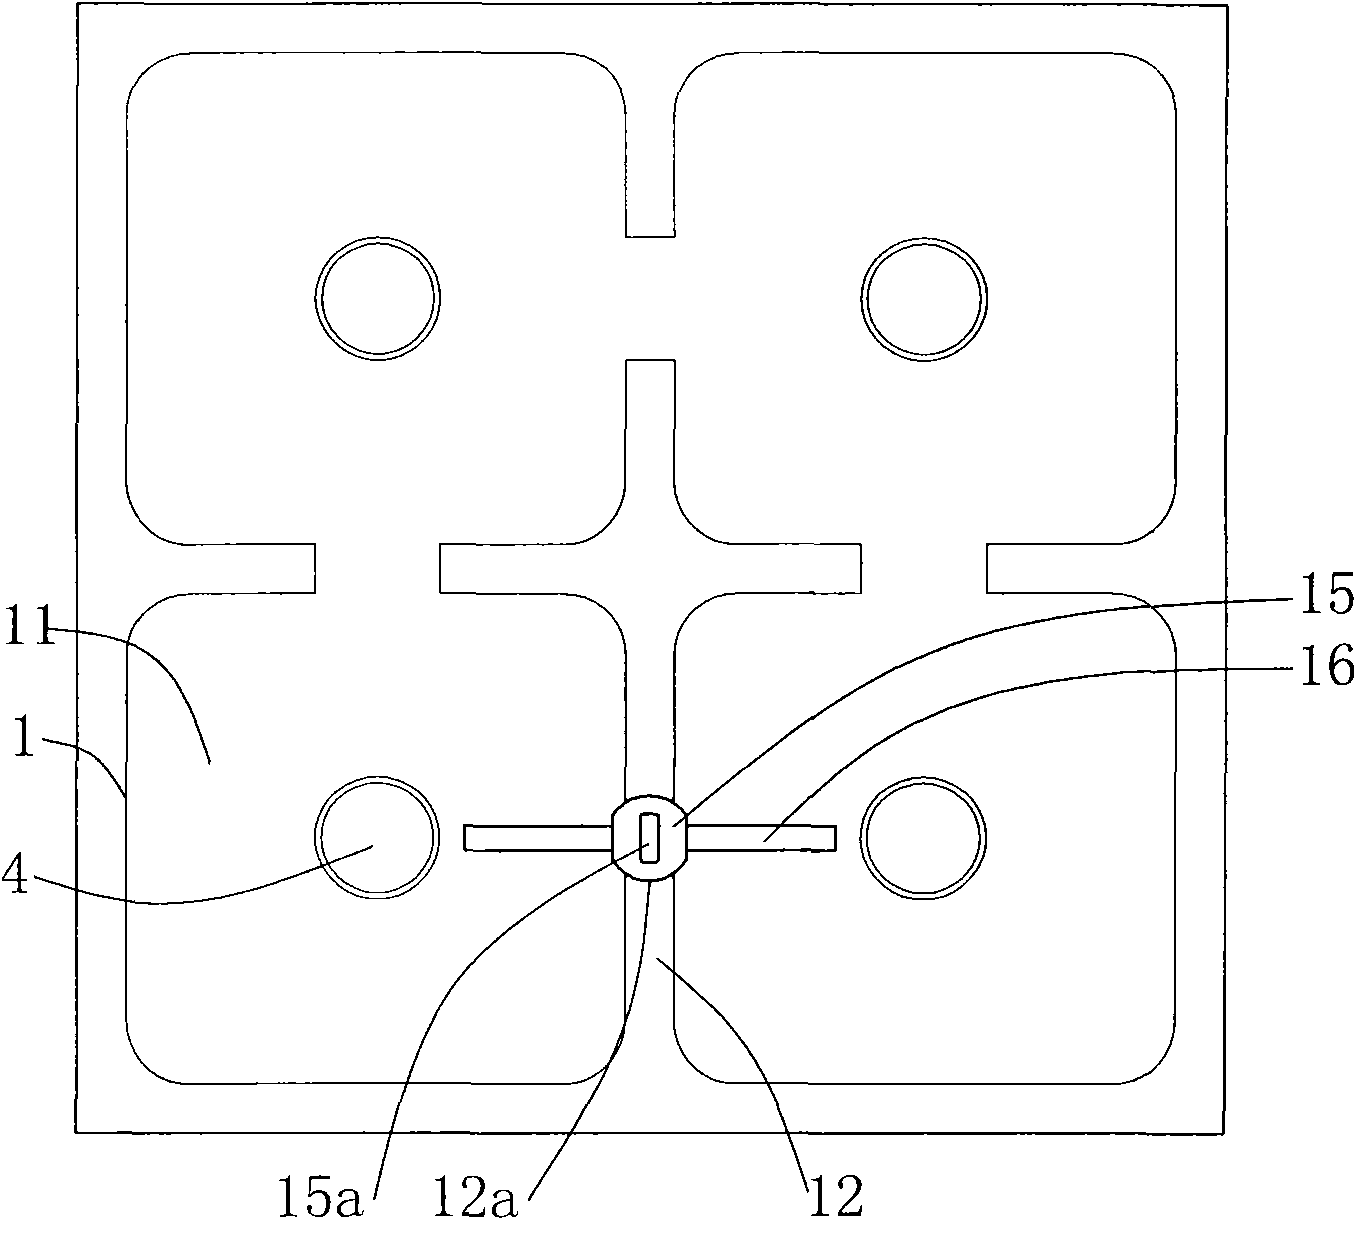 Cavity filter with rotary coupling regulation structure